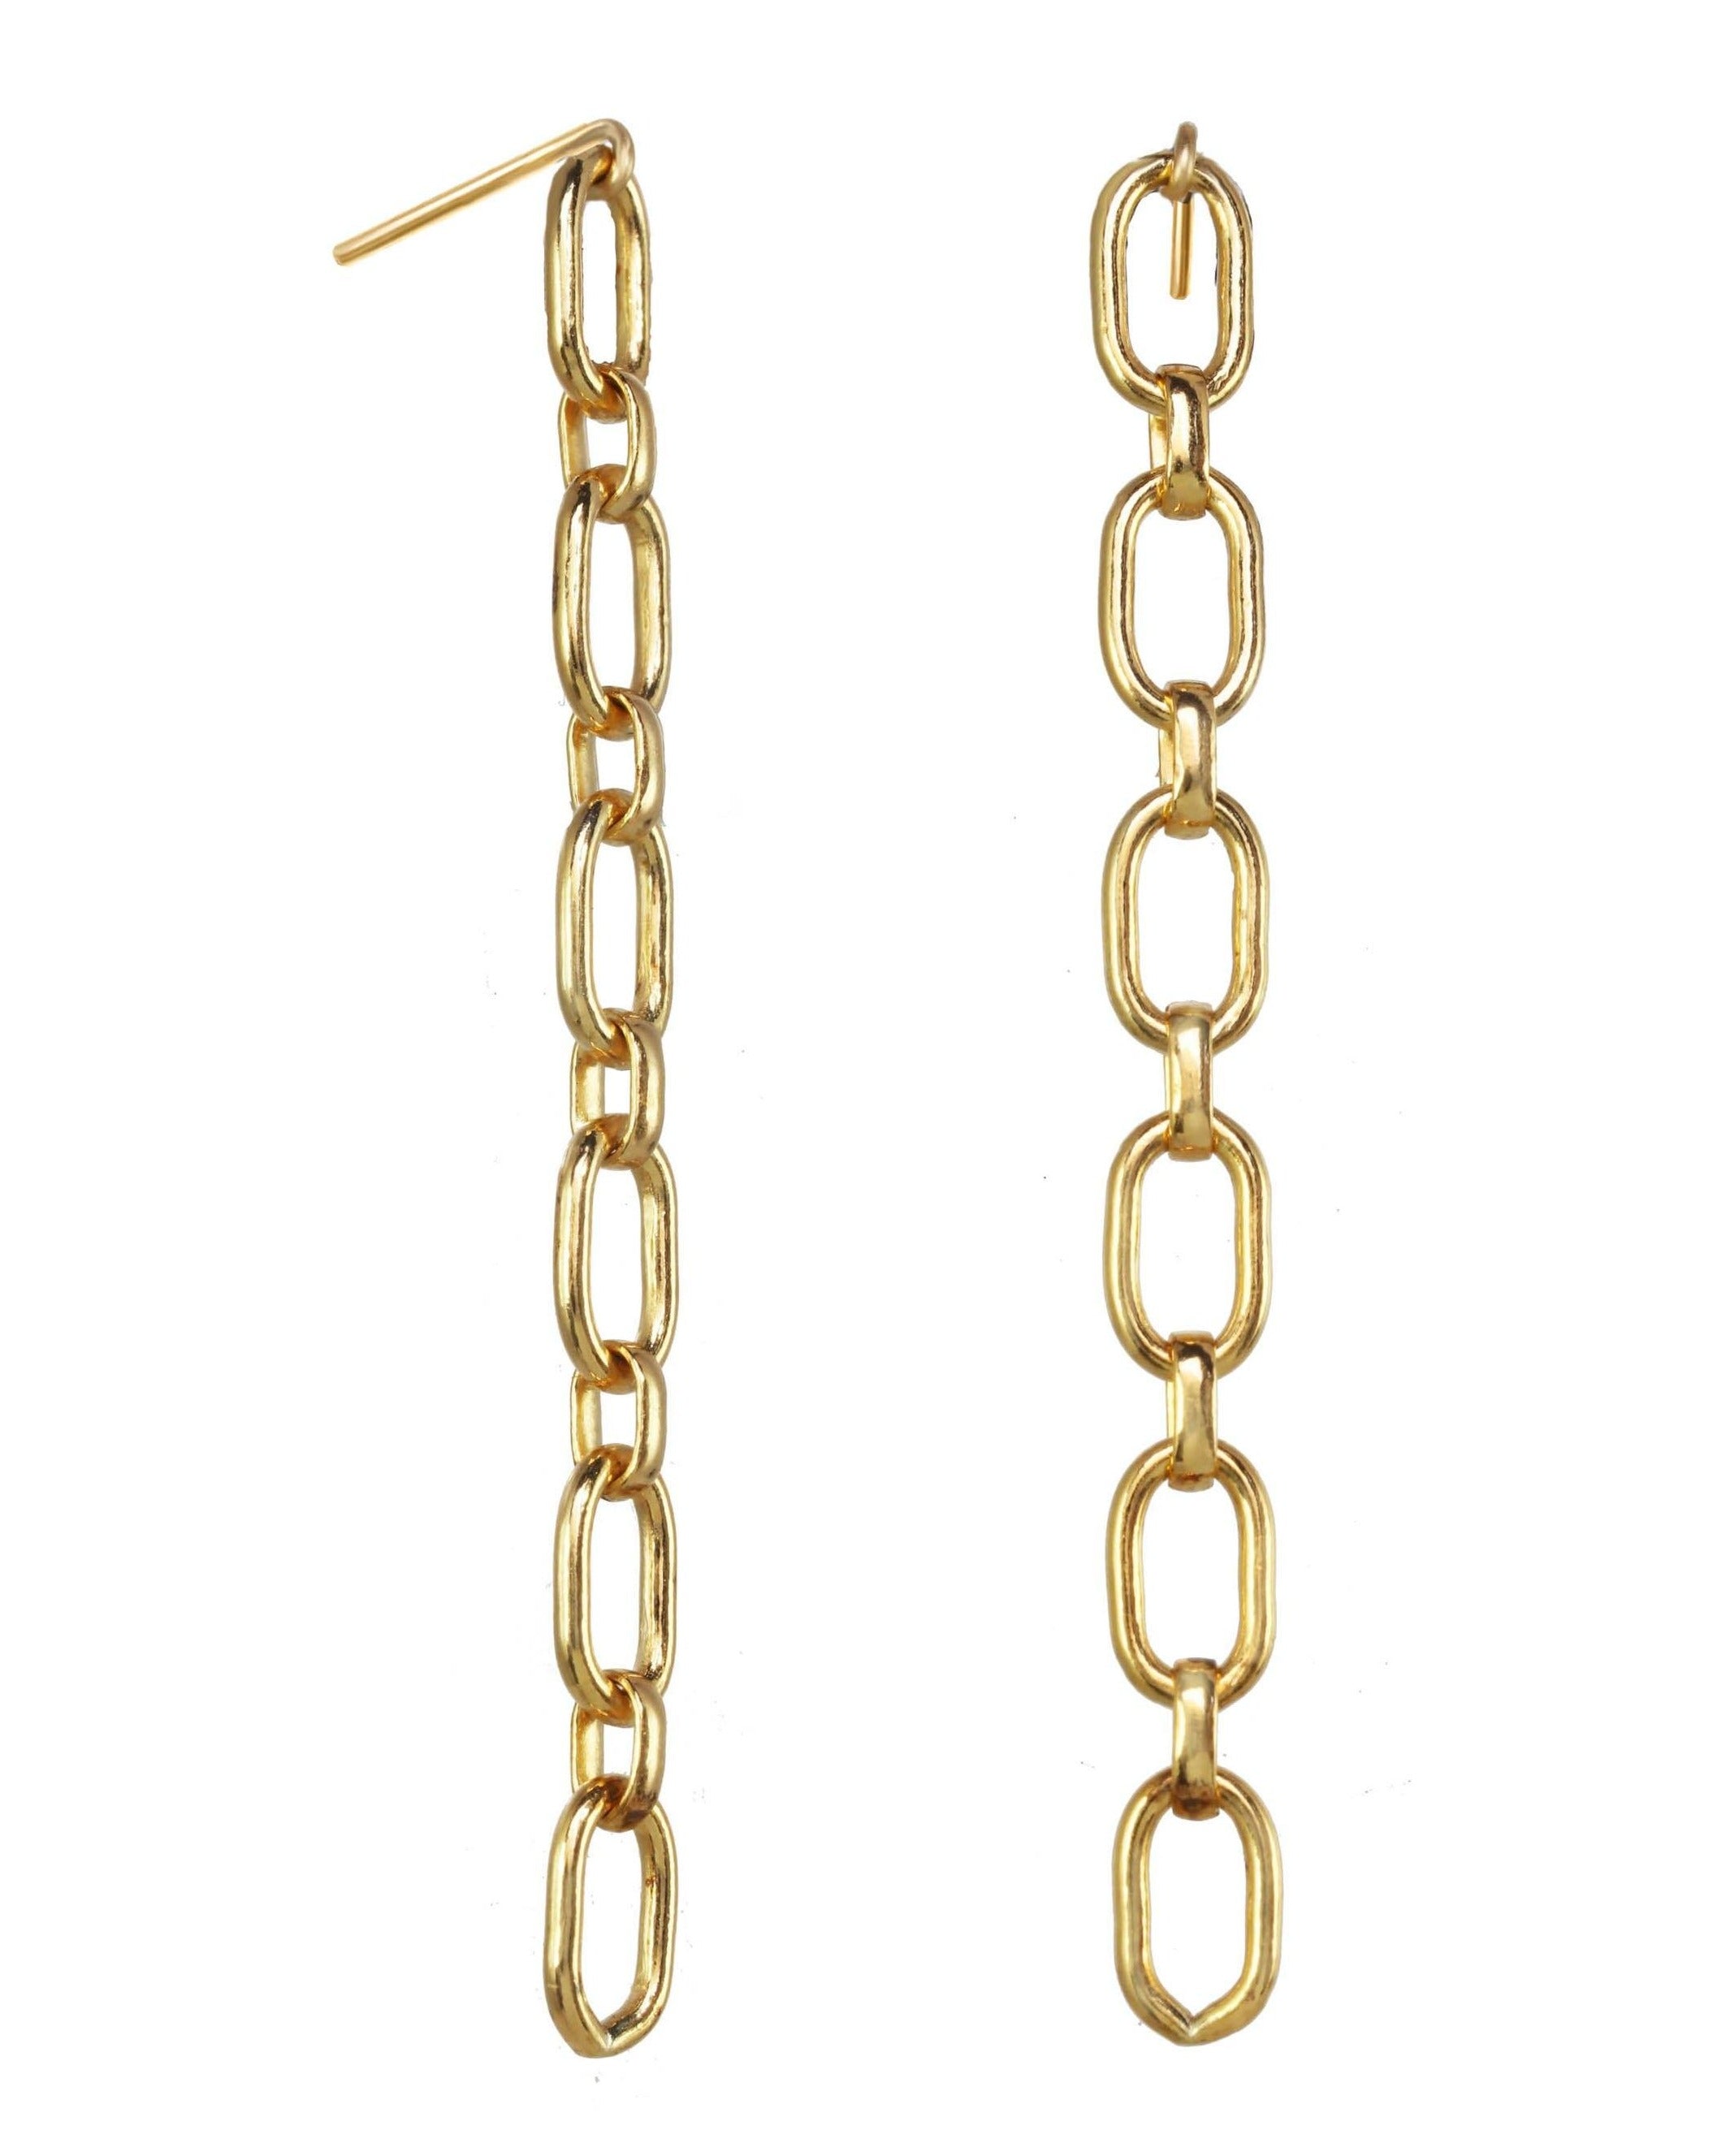 Finito Earrings by KOZAKH. 1.5 inch drop chain earrings, crafted in 14K Gold Filled.